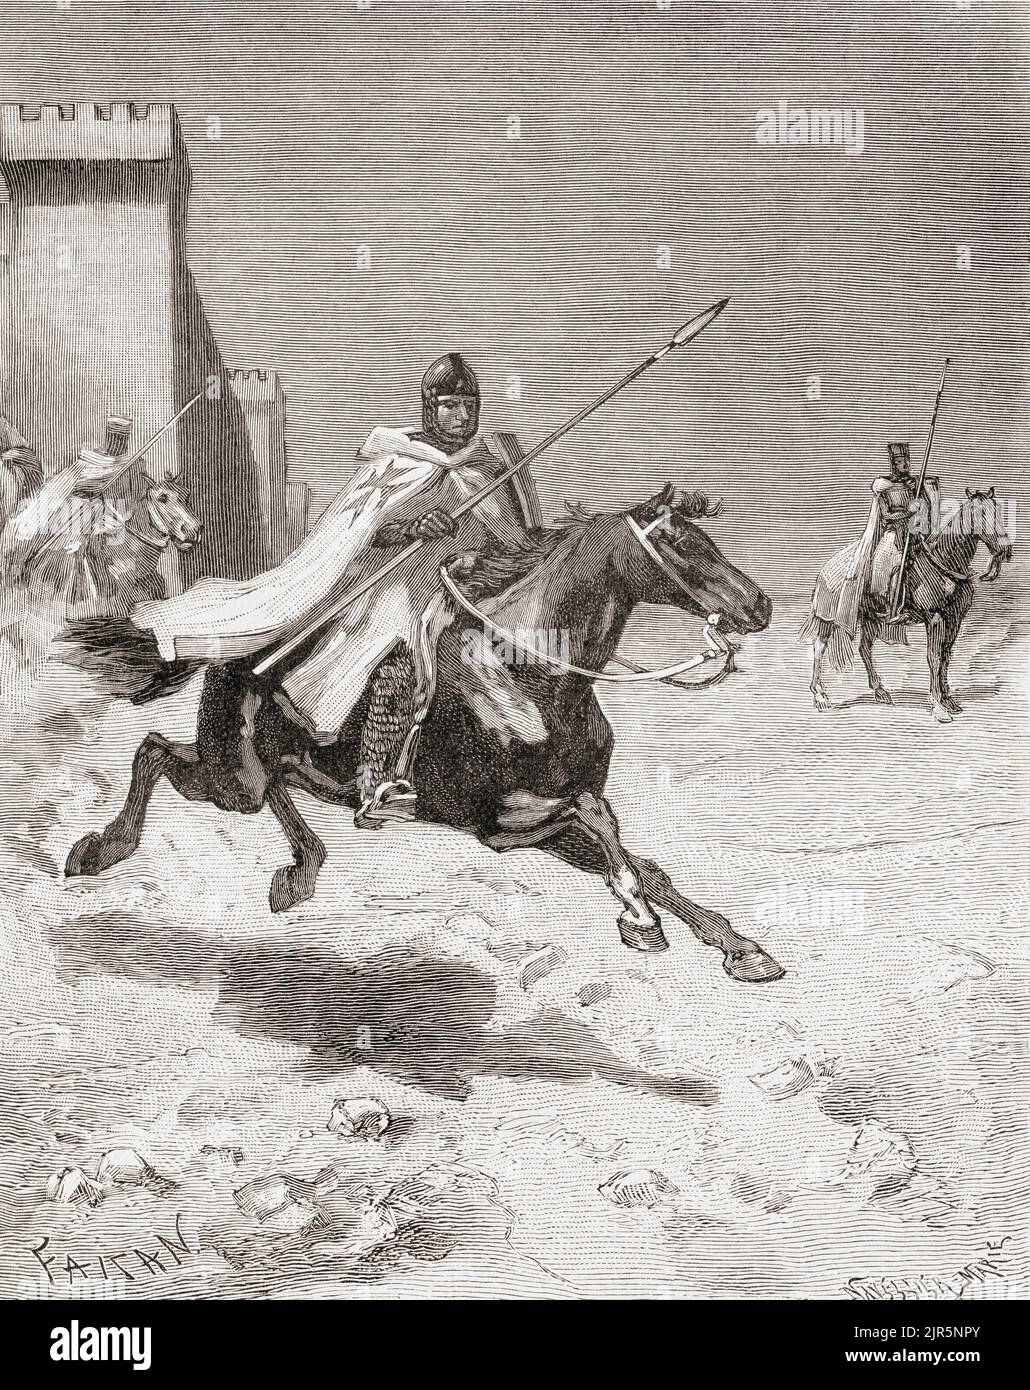 Knights Templars riding into battle.  From Histoire de France, published 1855. Stock Photo